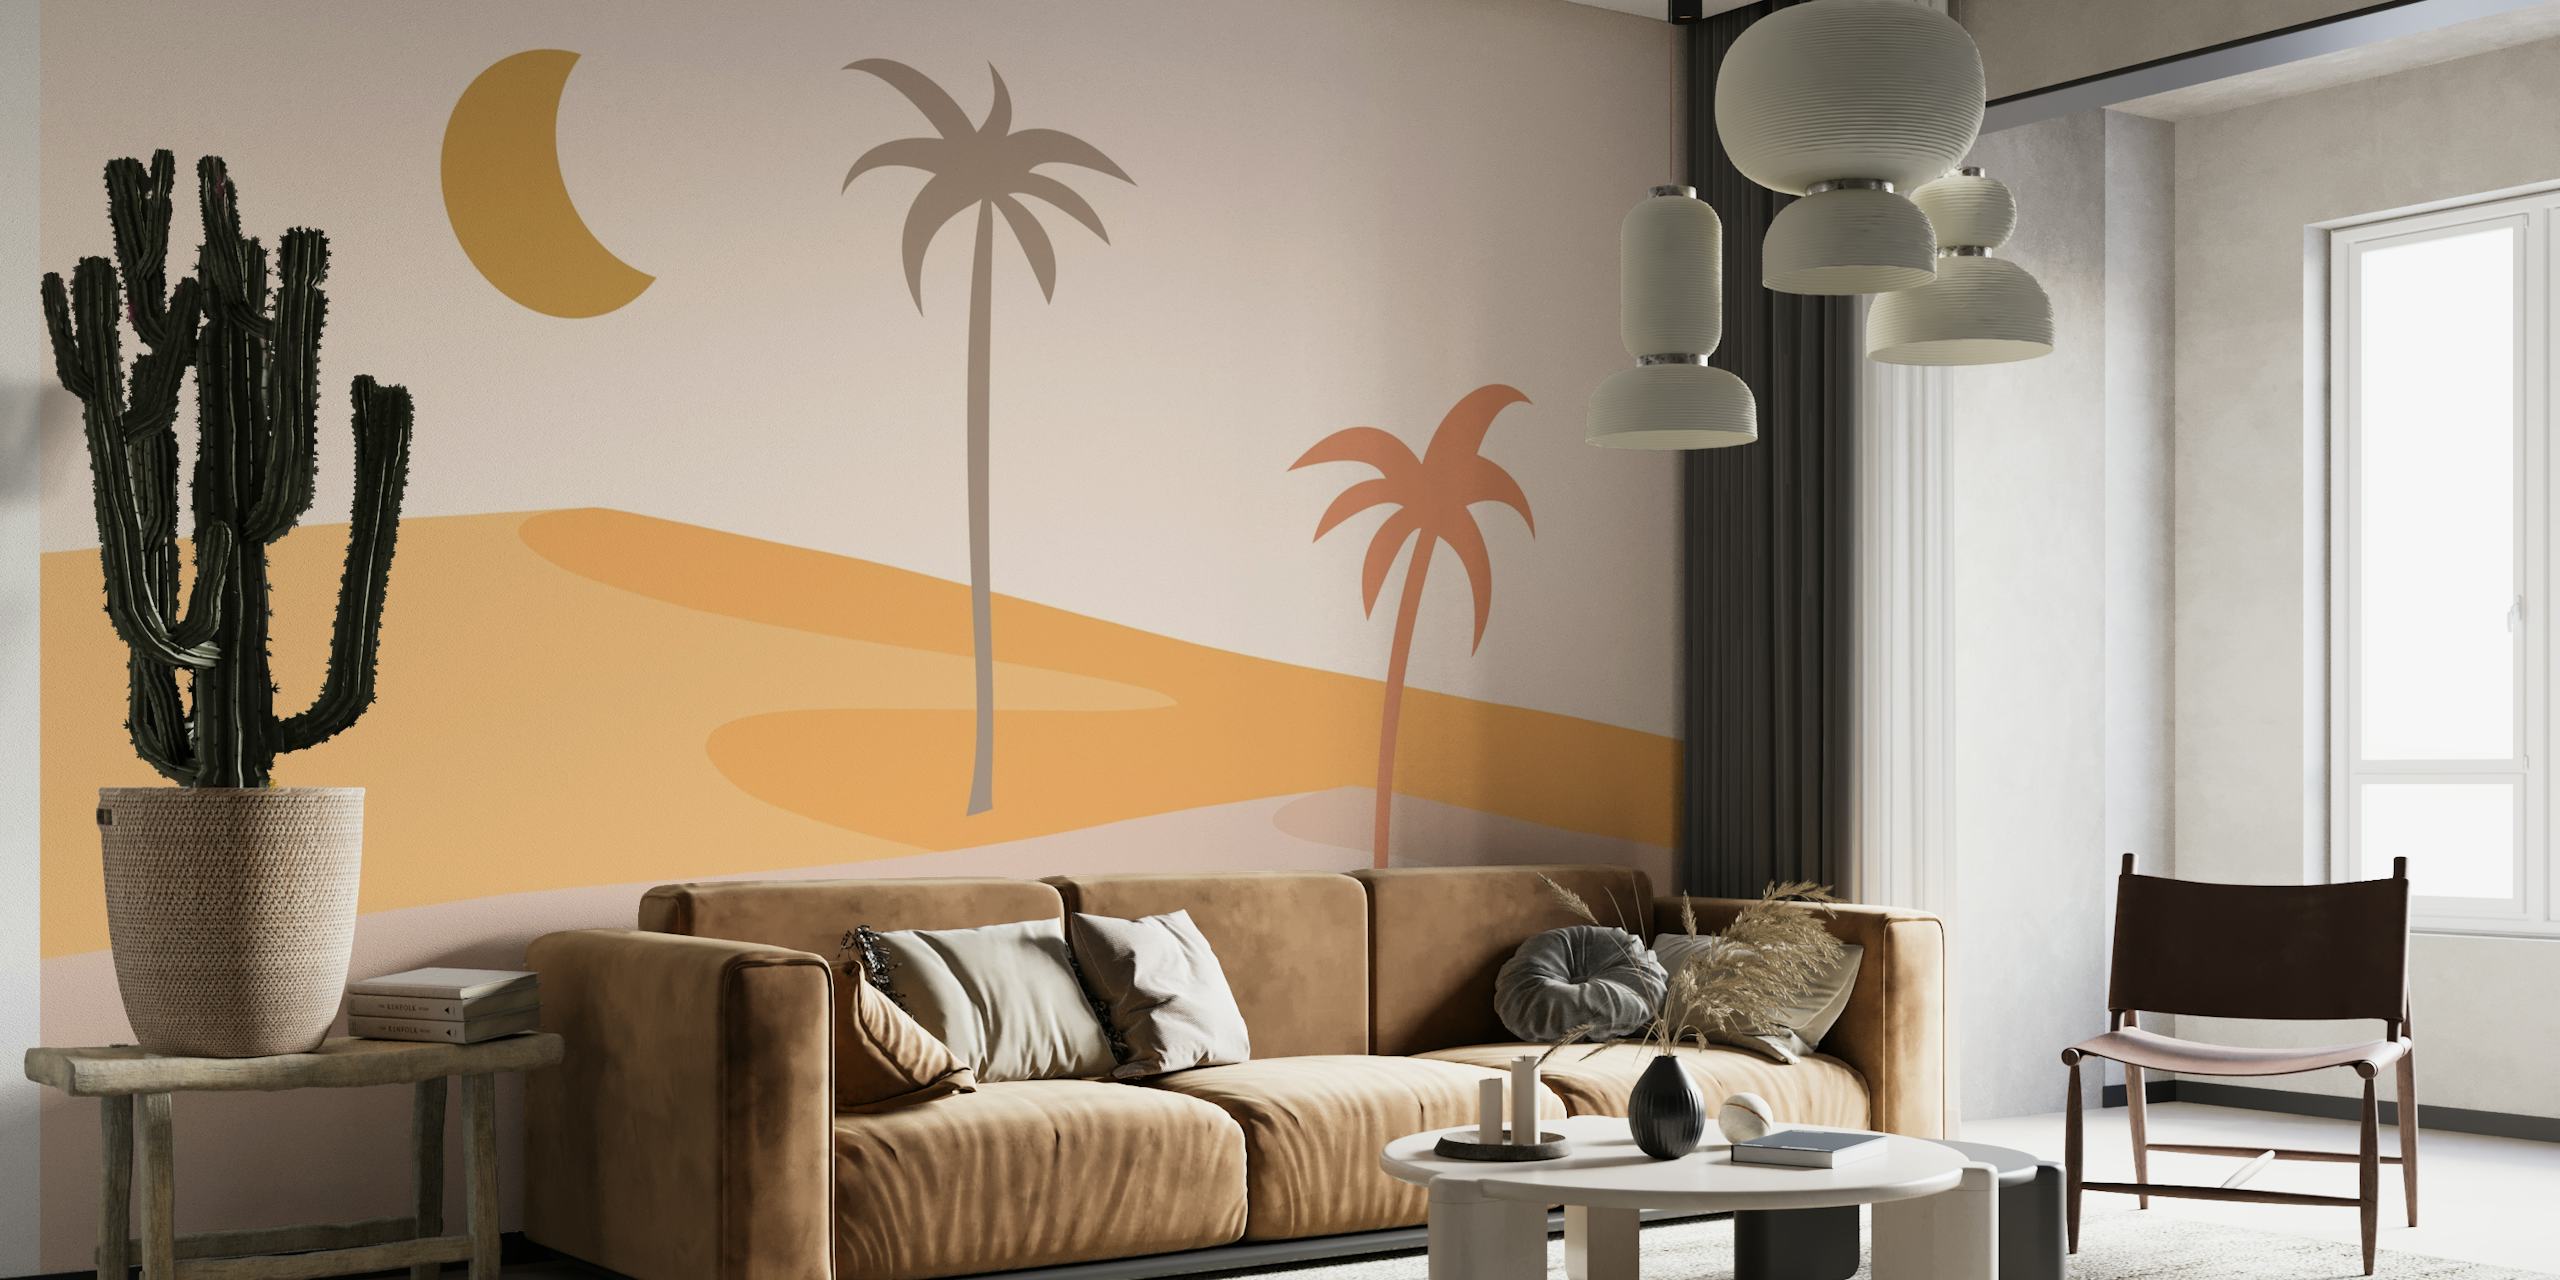 Desert Night Graphic wall mural with crescent moon and palm tree silhouettes